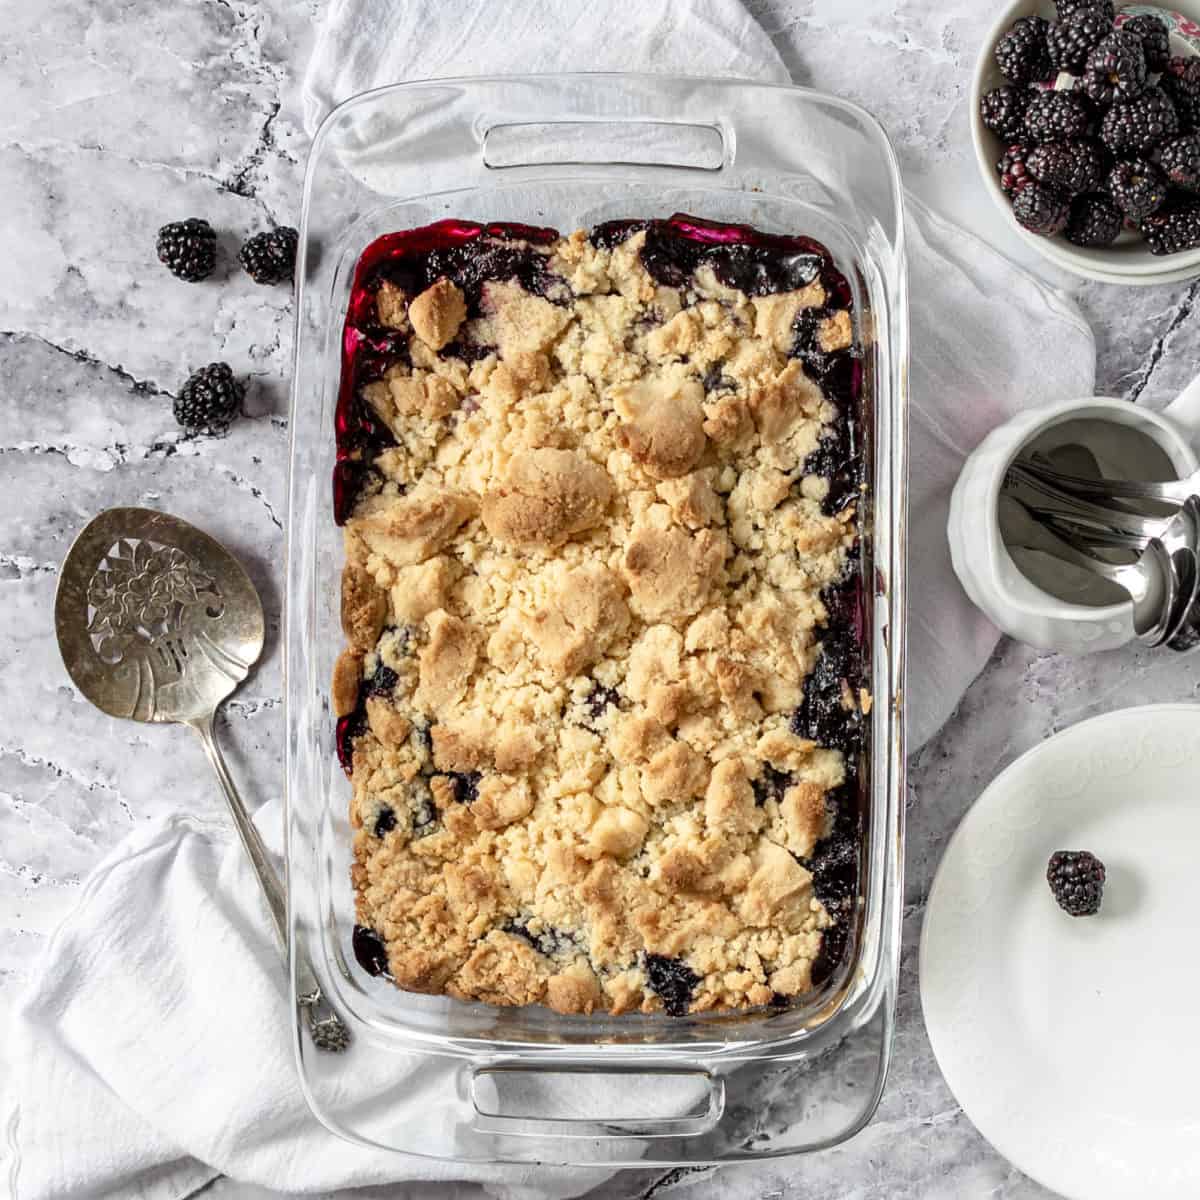 Finished blackberry cobbler dessert in a baking dish with spoons and blackberries.